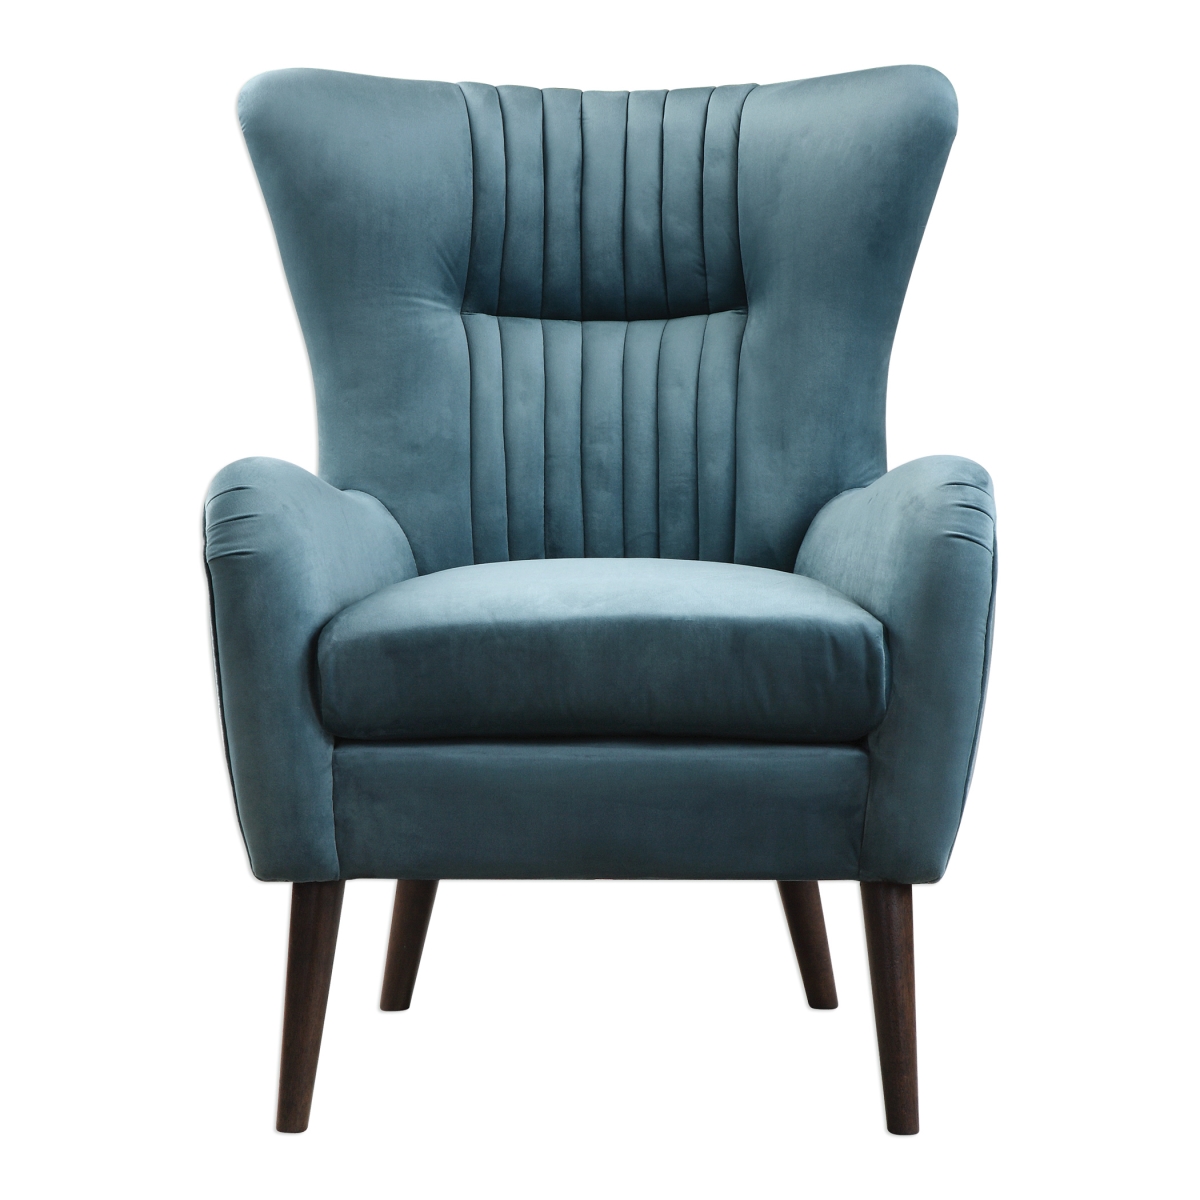 Picture of 212 Main 23314 Dax Mid-Century Accent Chair